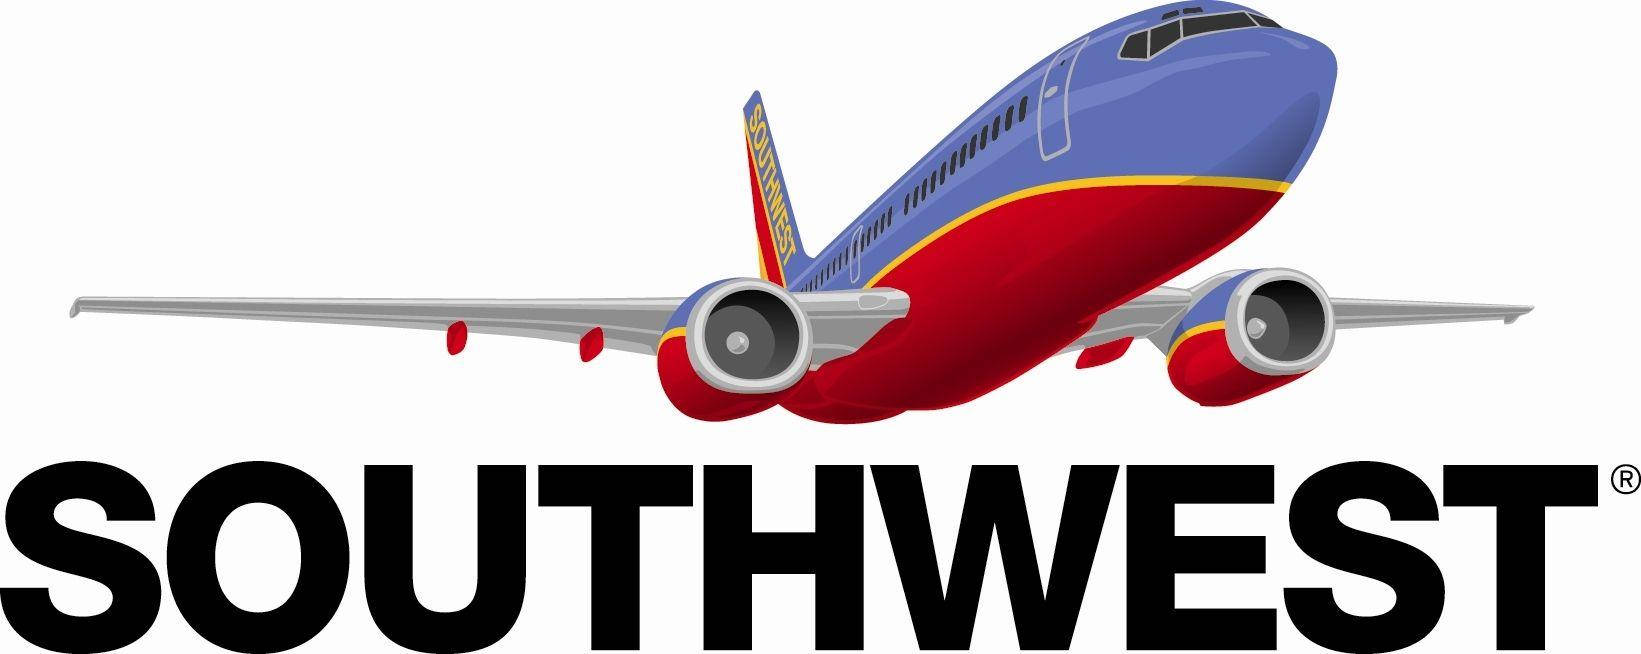 Southwest Airlines 1641 X 654 Wallpaper